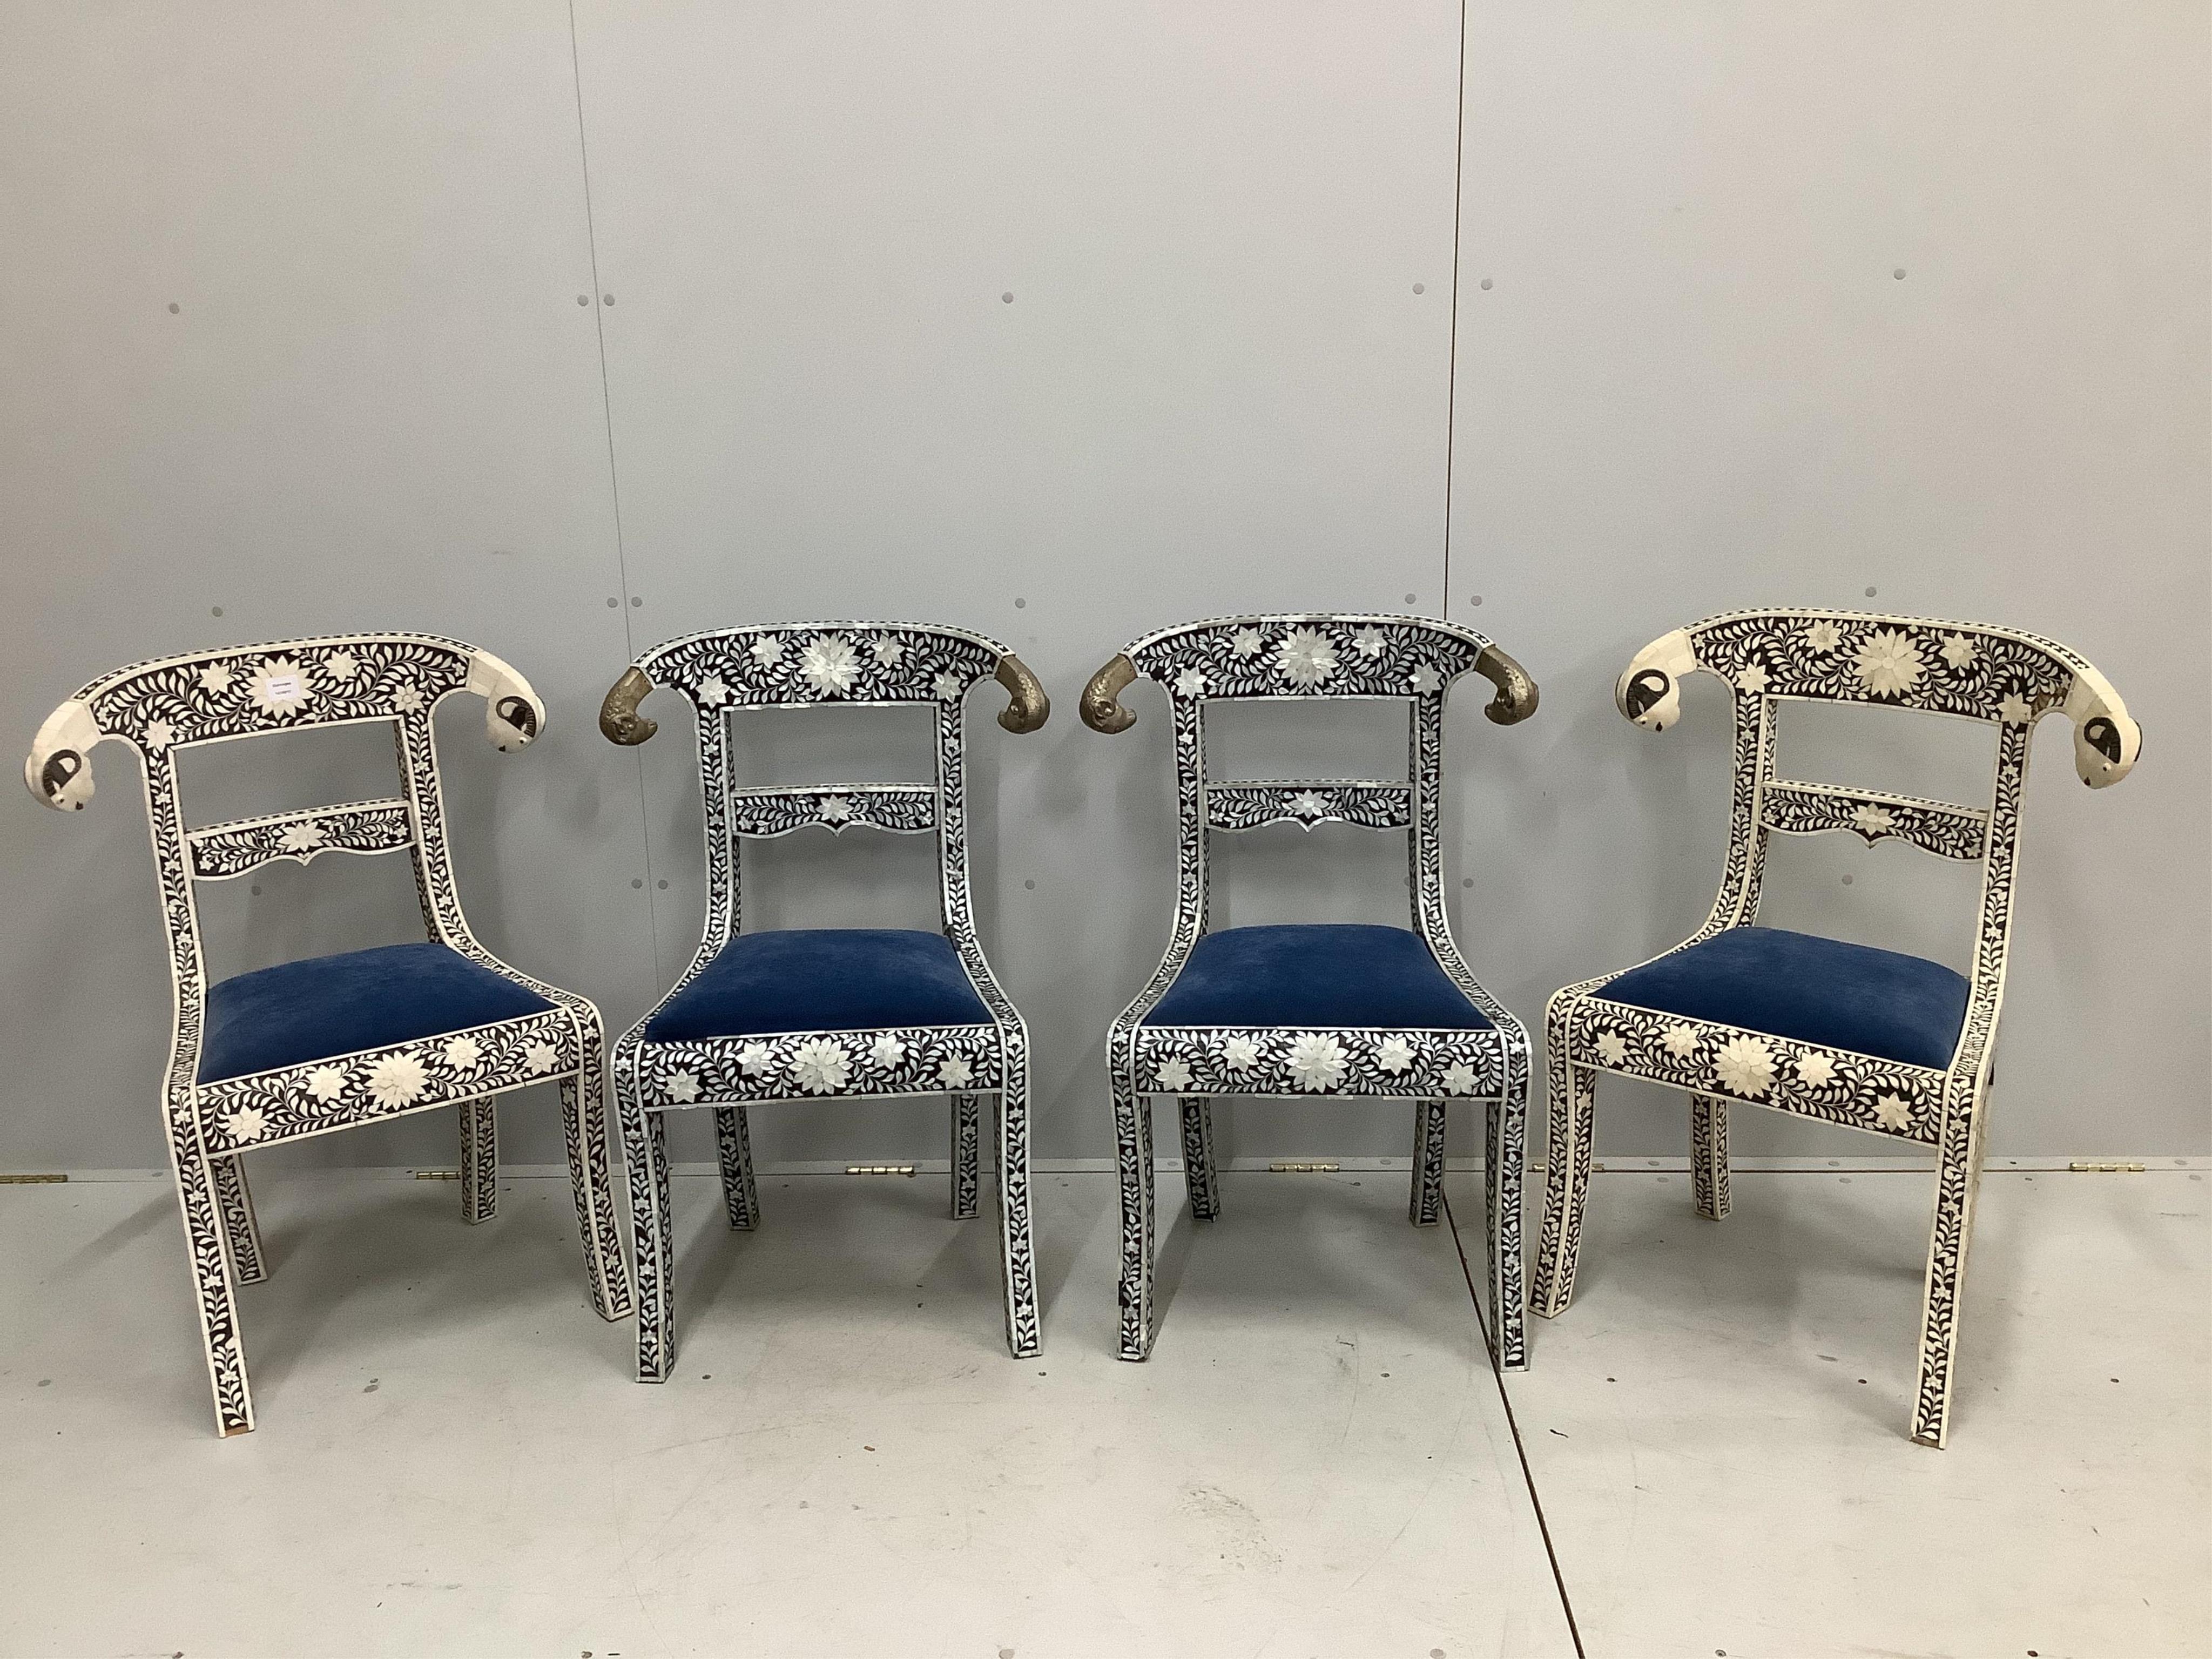 Two pairs of Indian bone, or mother of pearl, overlaid dining chairs, width 62cm, depth 44cm, height 90cm. Condition - good